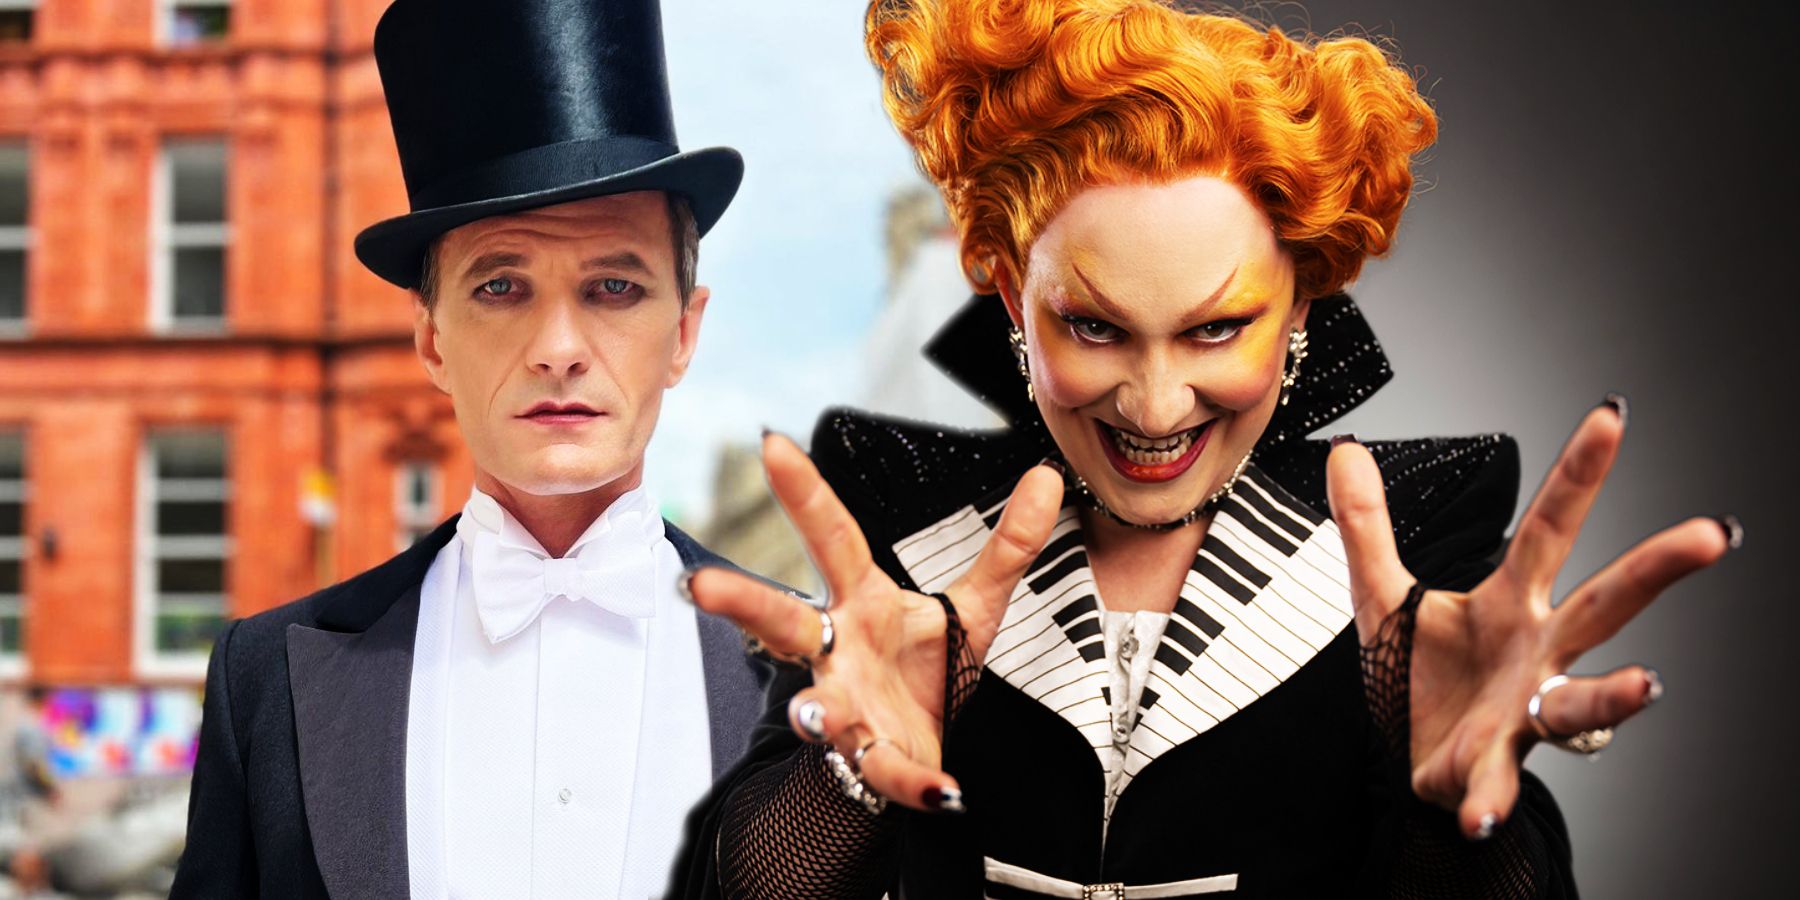 Neil Patrick Harris and Jinkx Monsoon in Doctor Who